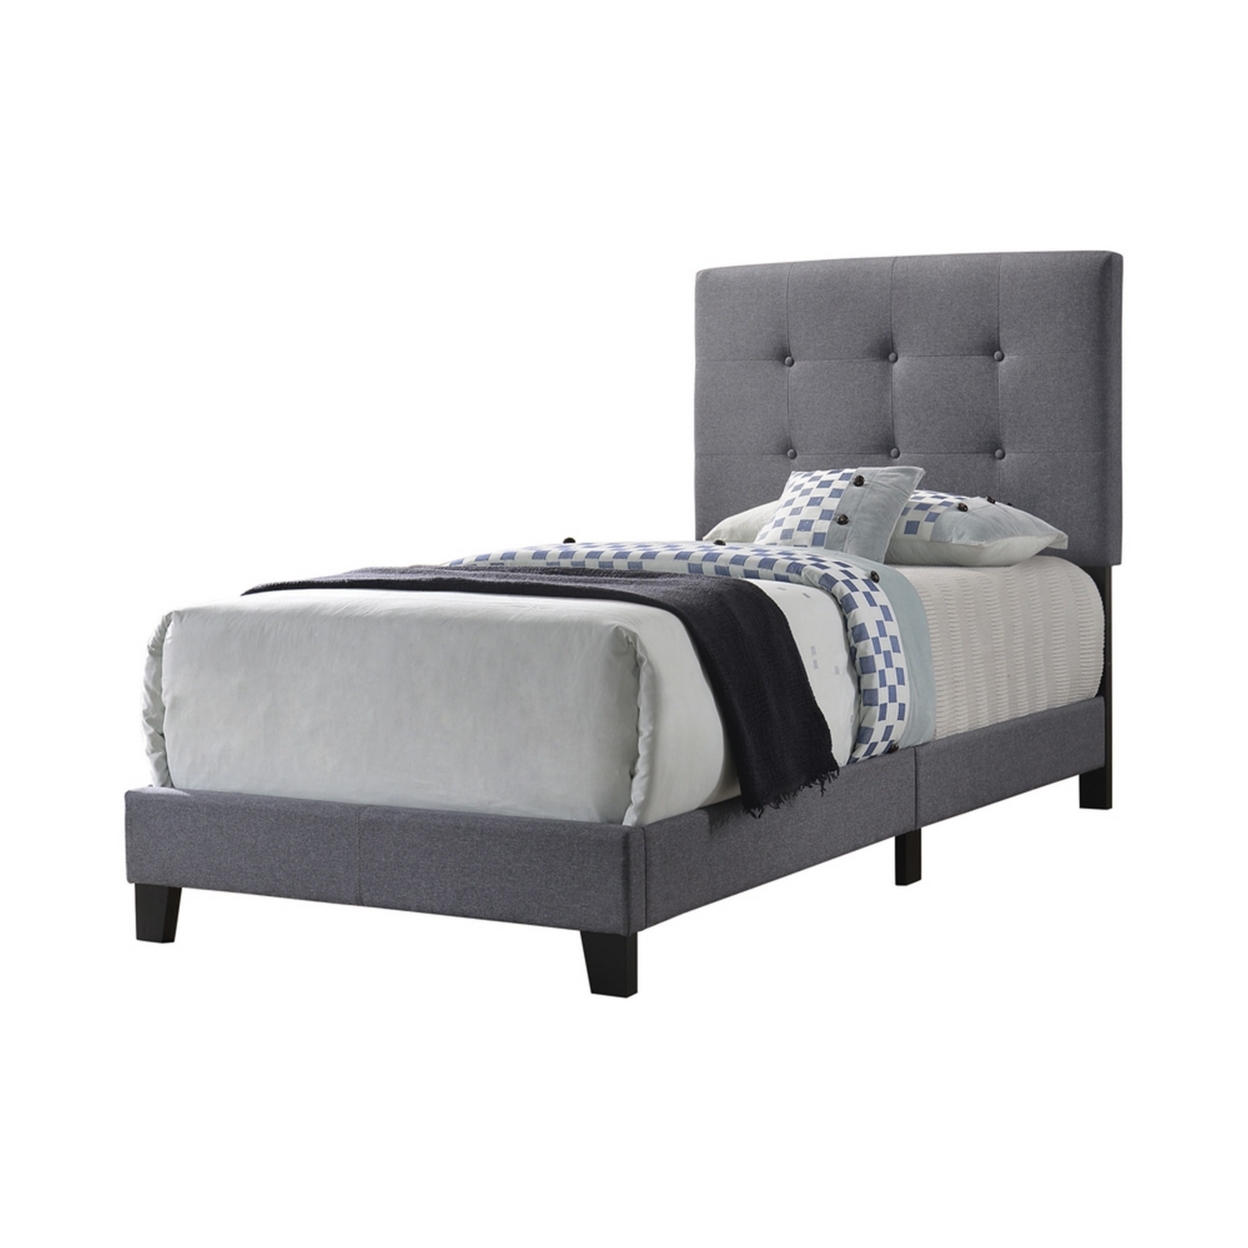 Twin Size Bed With Square Button Tufted Headboard And Chamfered Legs, Gray- Saltoro Sherpi